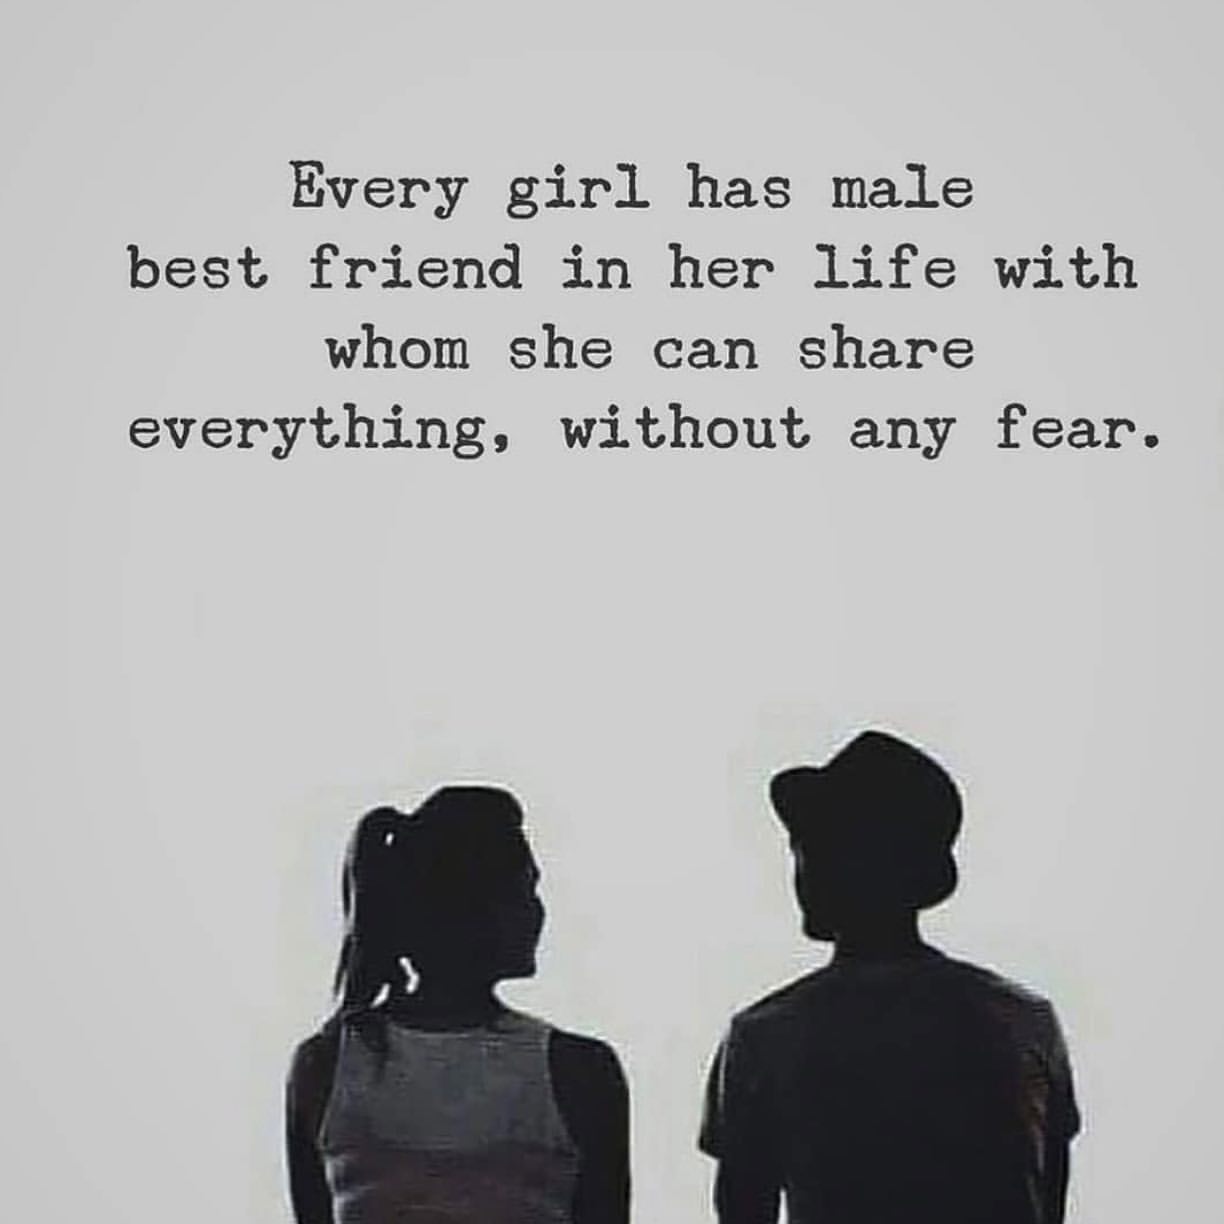 Every girl has male best friend in her life with whom she can share everything, without any fear.